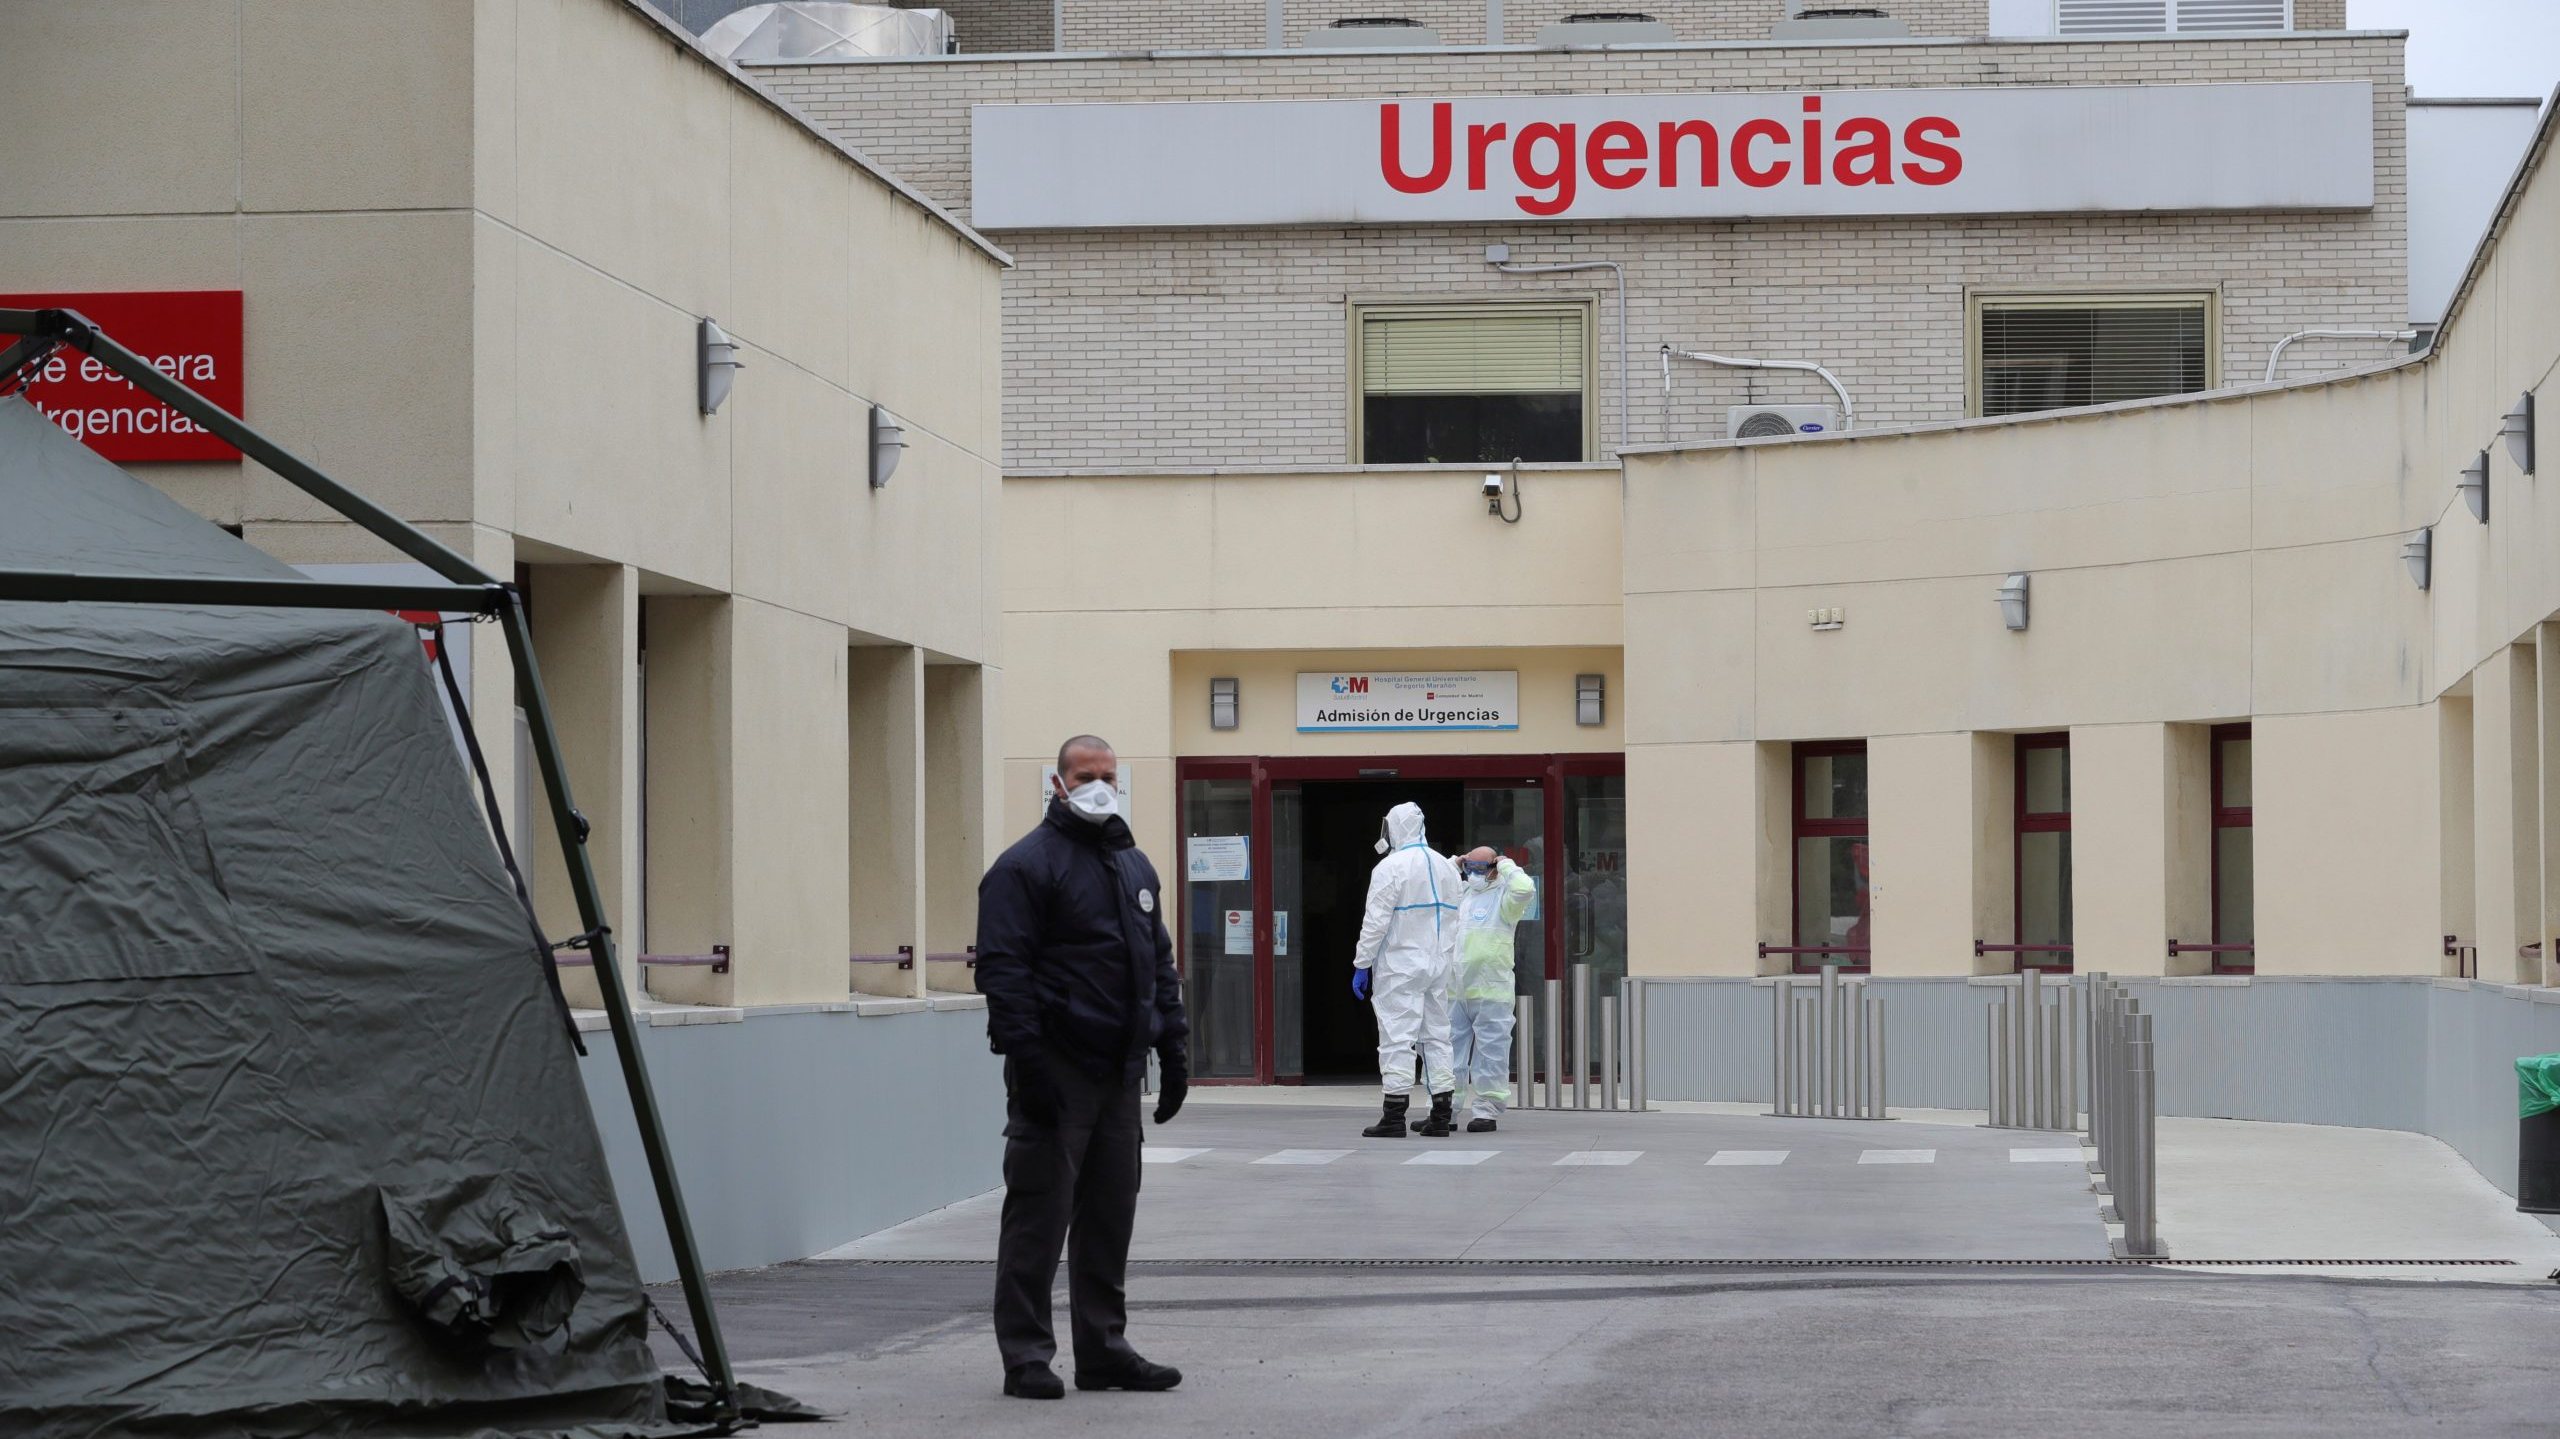 epa08331417 Entrance of Gregorio Maranon Hospital in Madrid, Spain, 30 March 2020. Spain is on its 16th day of lockdown as Spanish government has announced a temporary stop to all construction works and other non-essential economic activities as the Mediterranean country suffers one of the worst outbreaks of the pandemic COVID-19 disease caused by the SARS-CoV-2 coronavirus.  EPA/JuanJo Martin